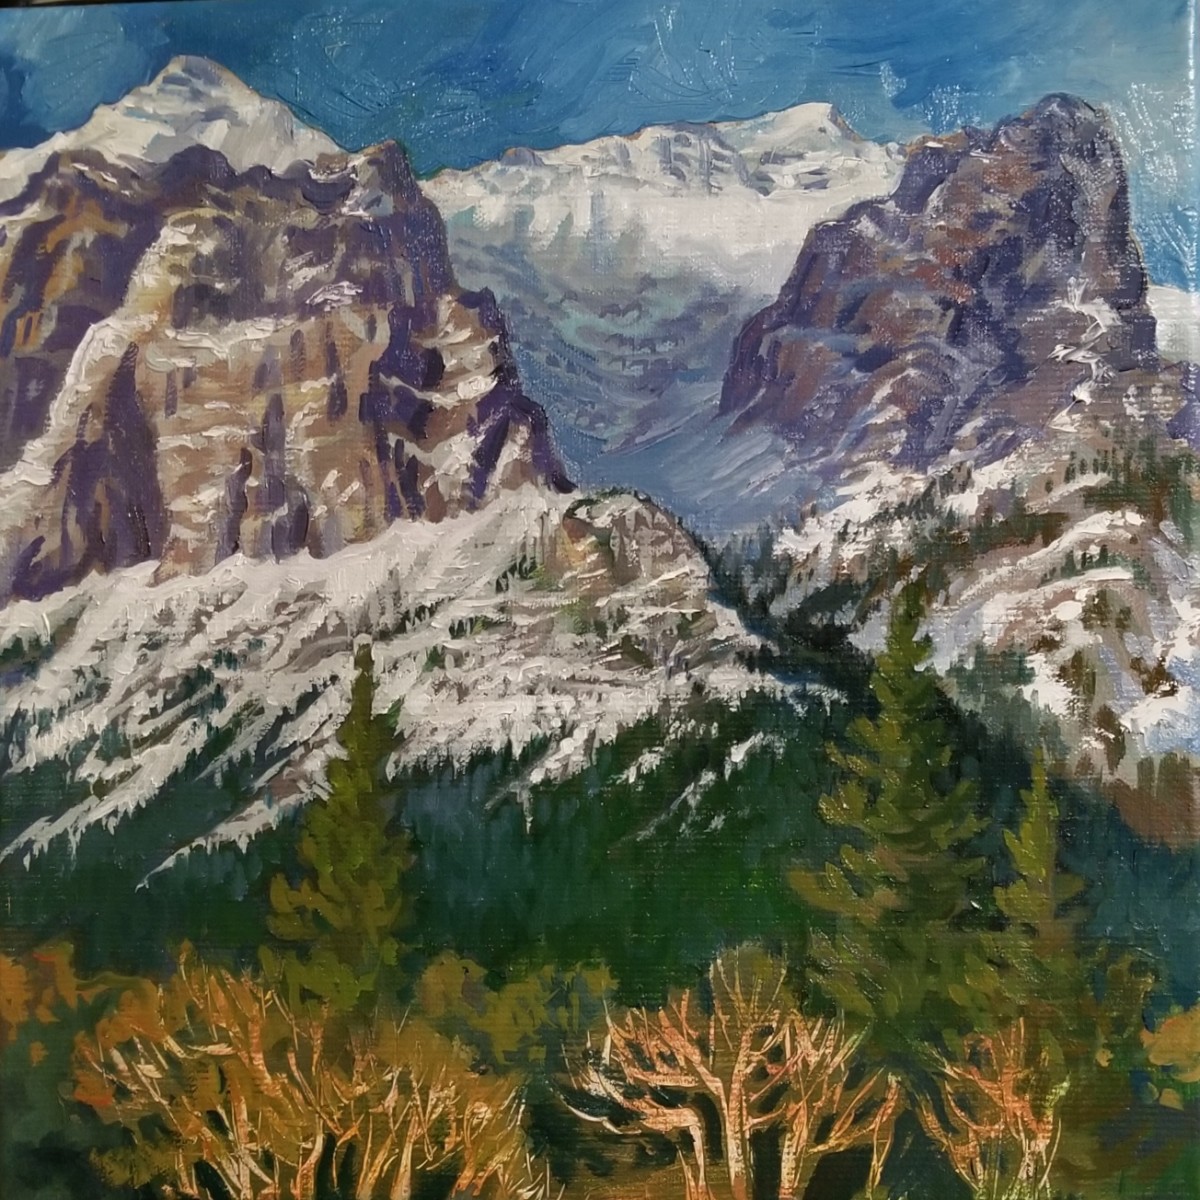 "Above Canmore - Alberta Rockies" by Jan Poynter 